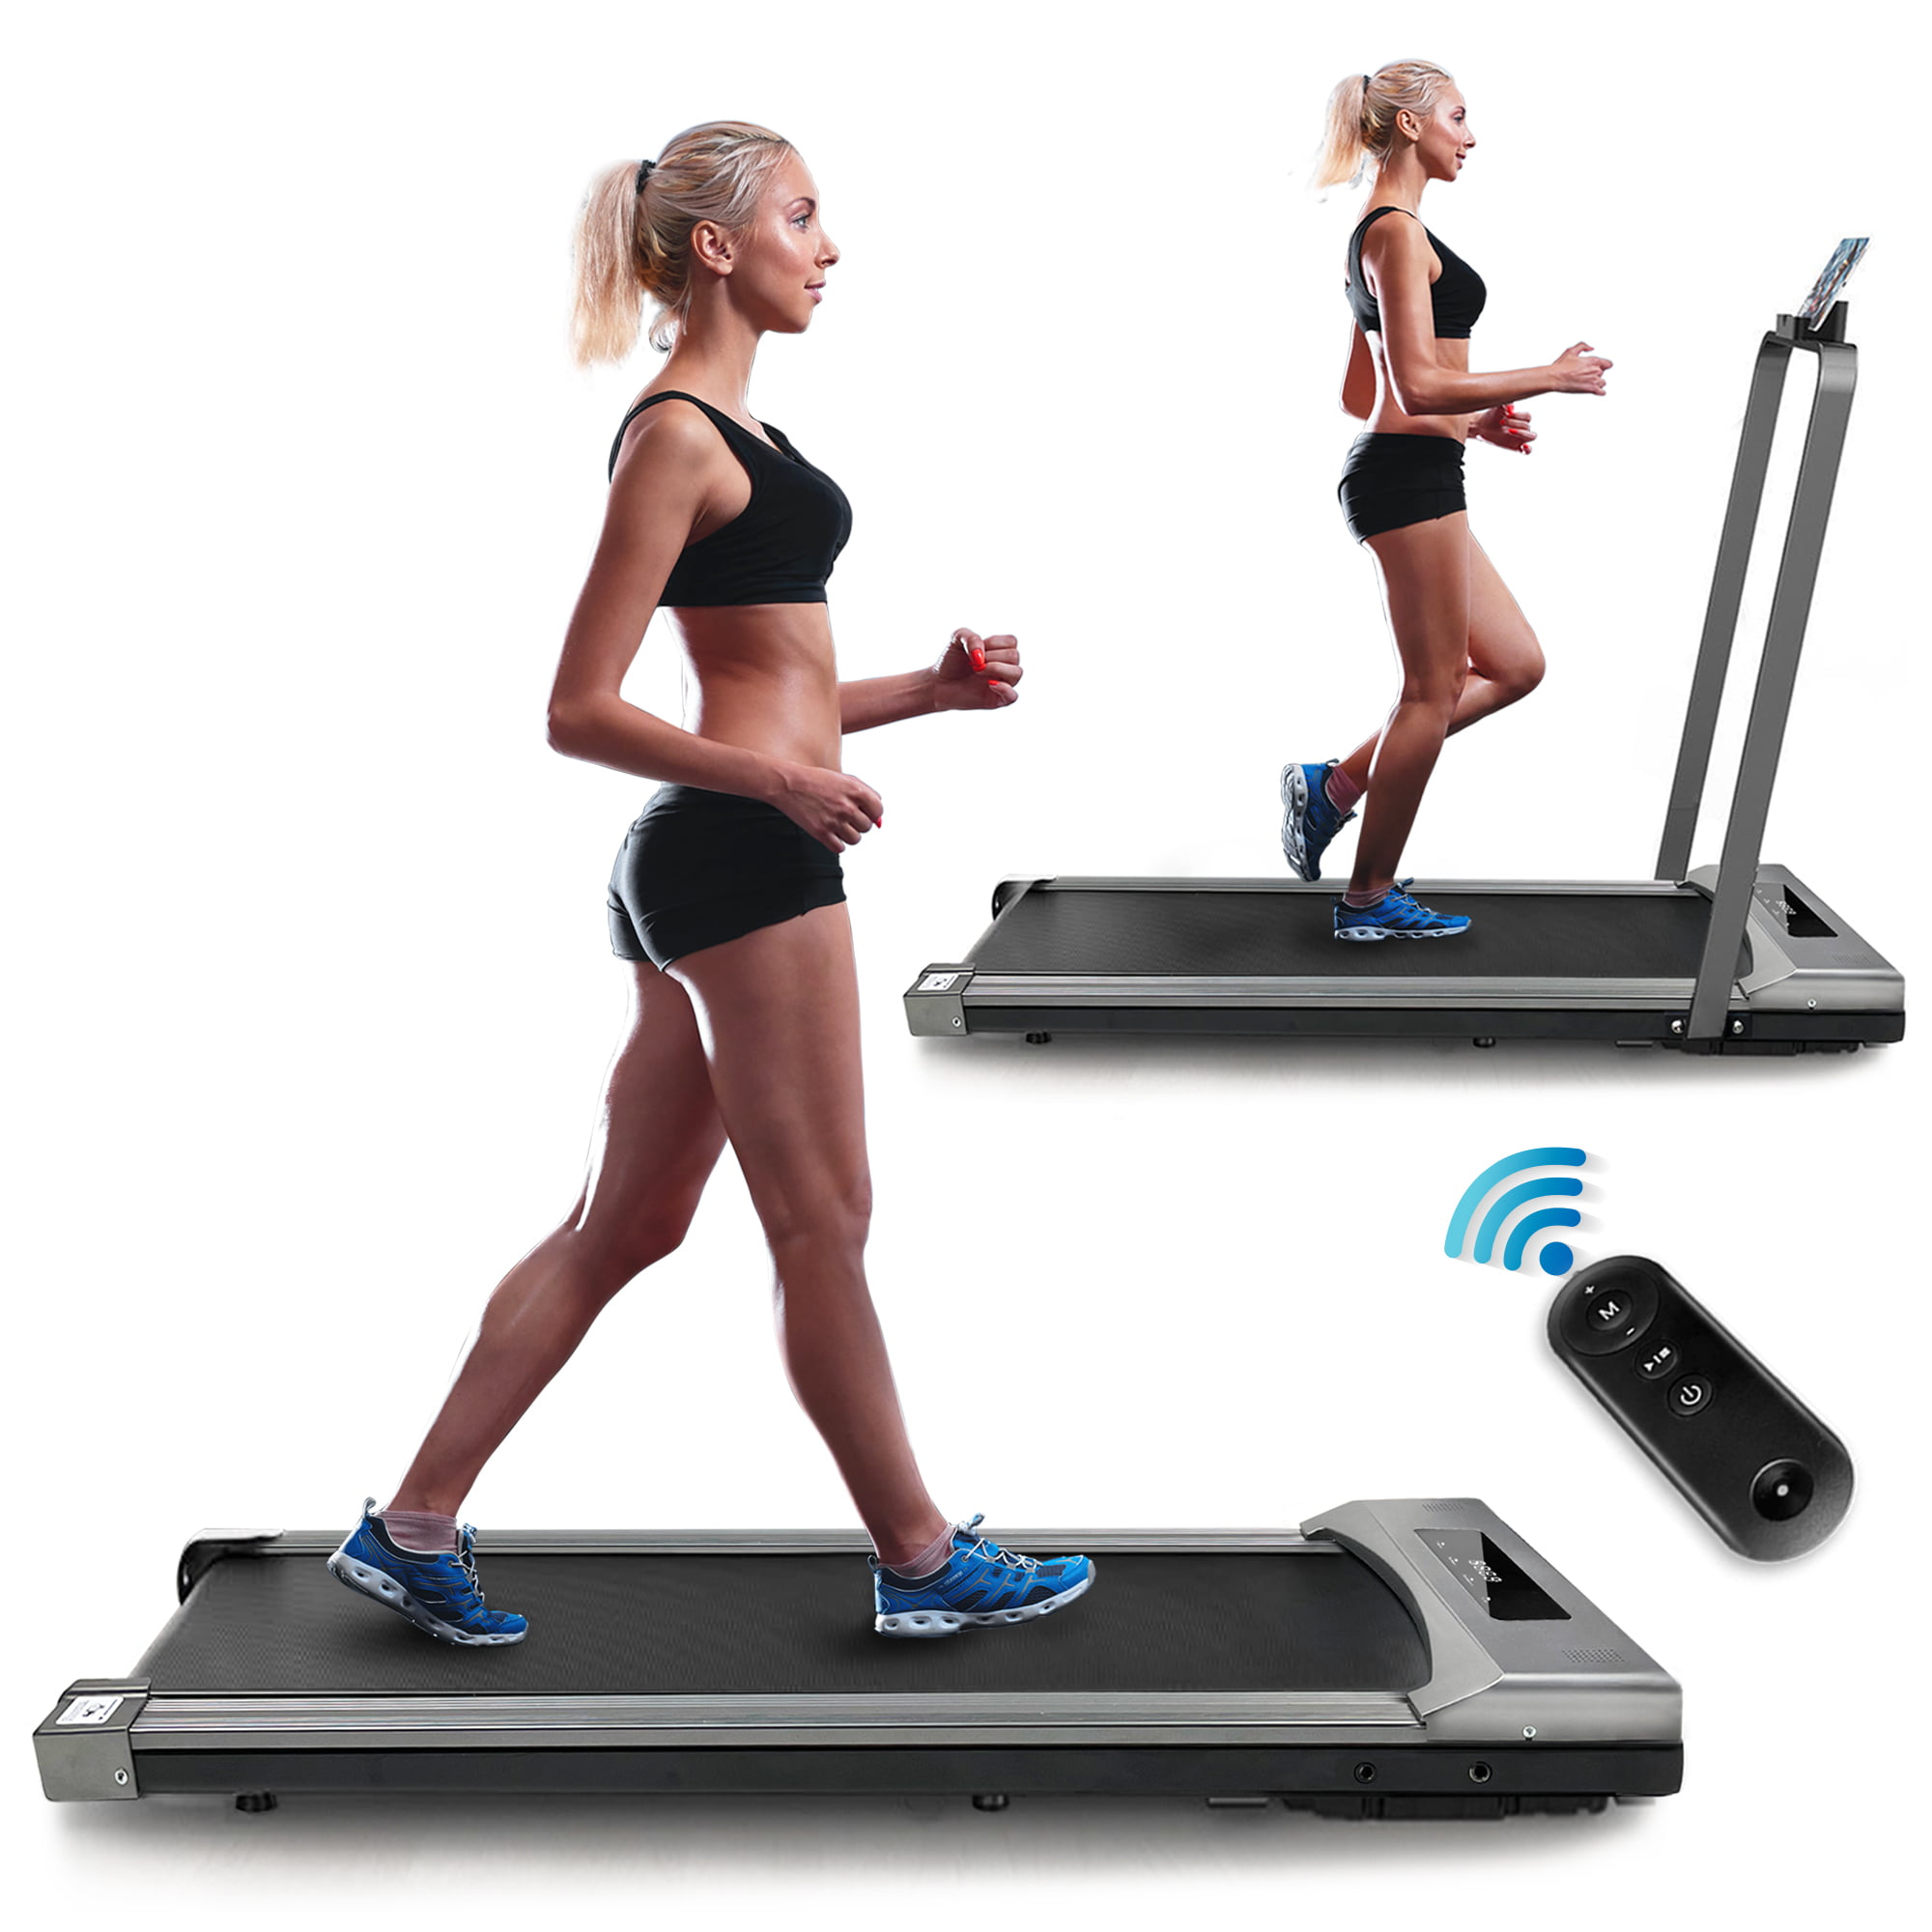 FUNMILY Treadmill for Home 265 LBS Weight Folding Treadmills with Desk and Bluetooth Speaker Portable Electric Treadmill Machine for Running Walking Jogging Workout